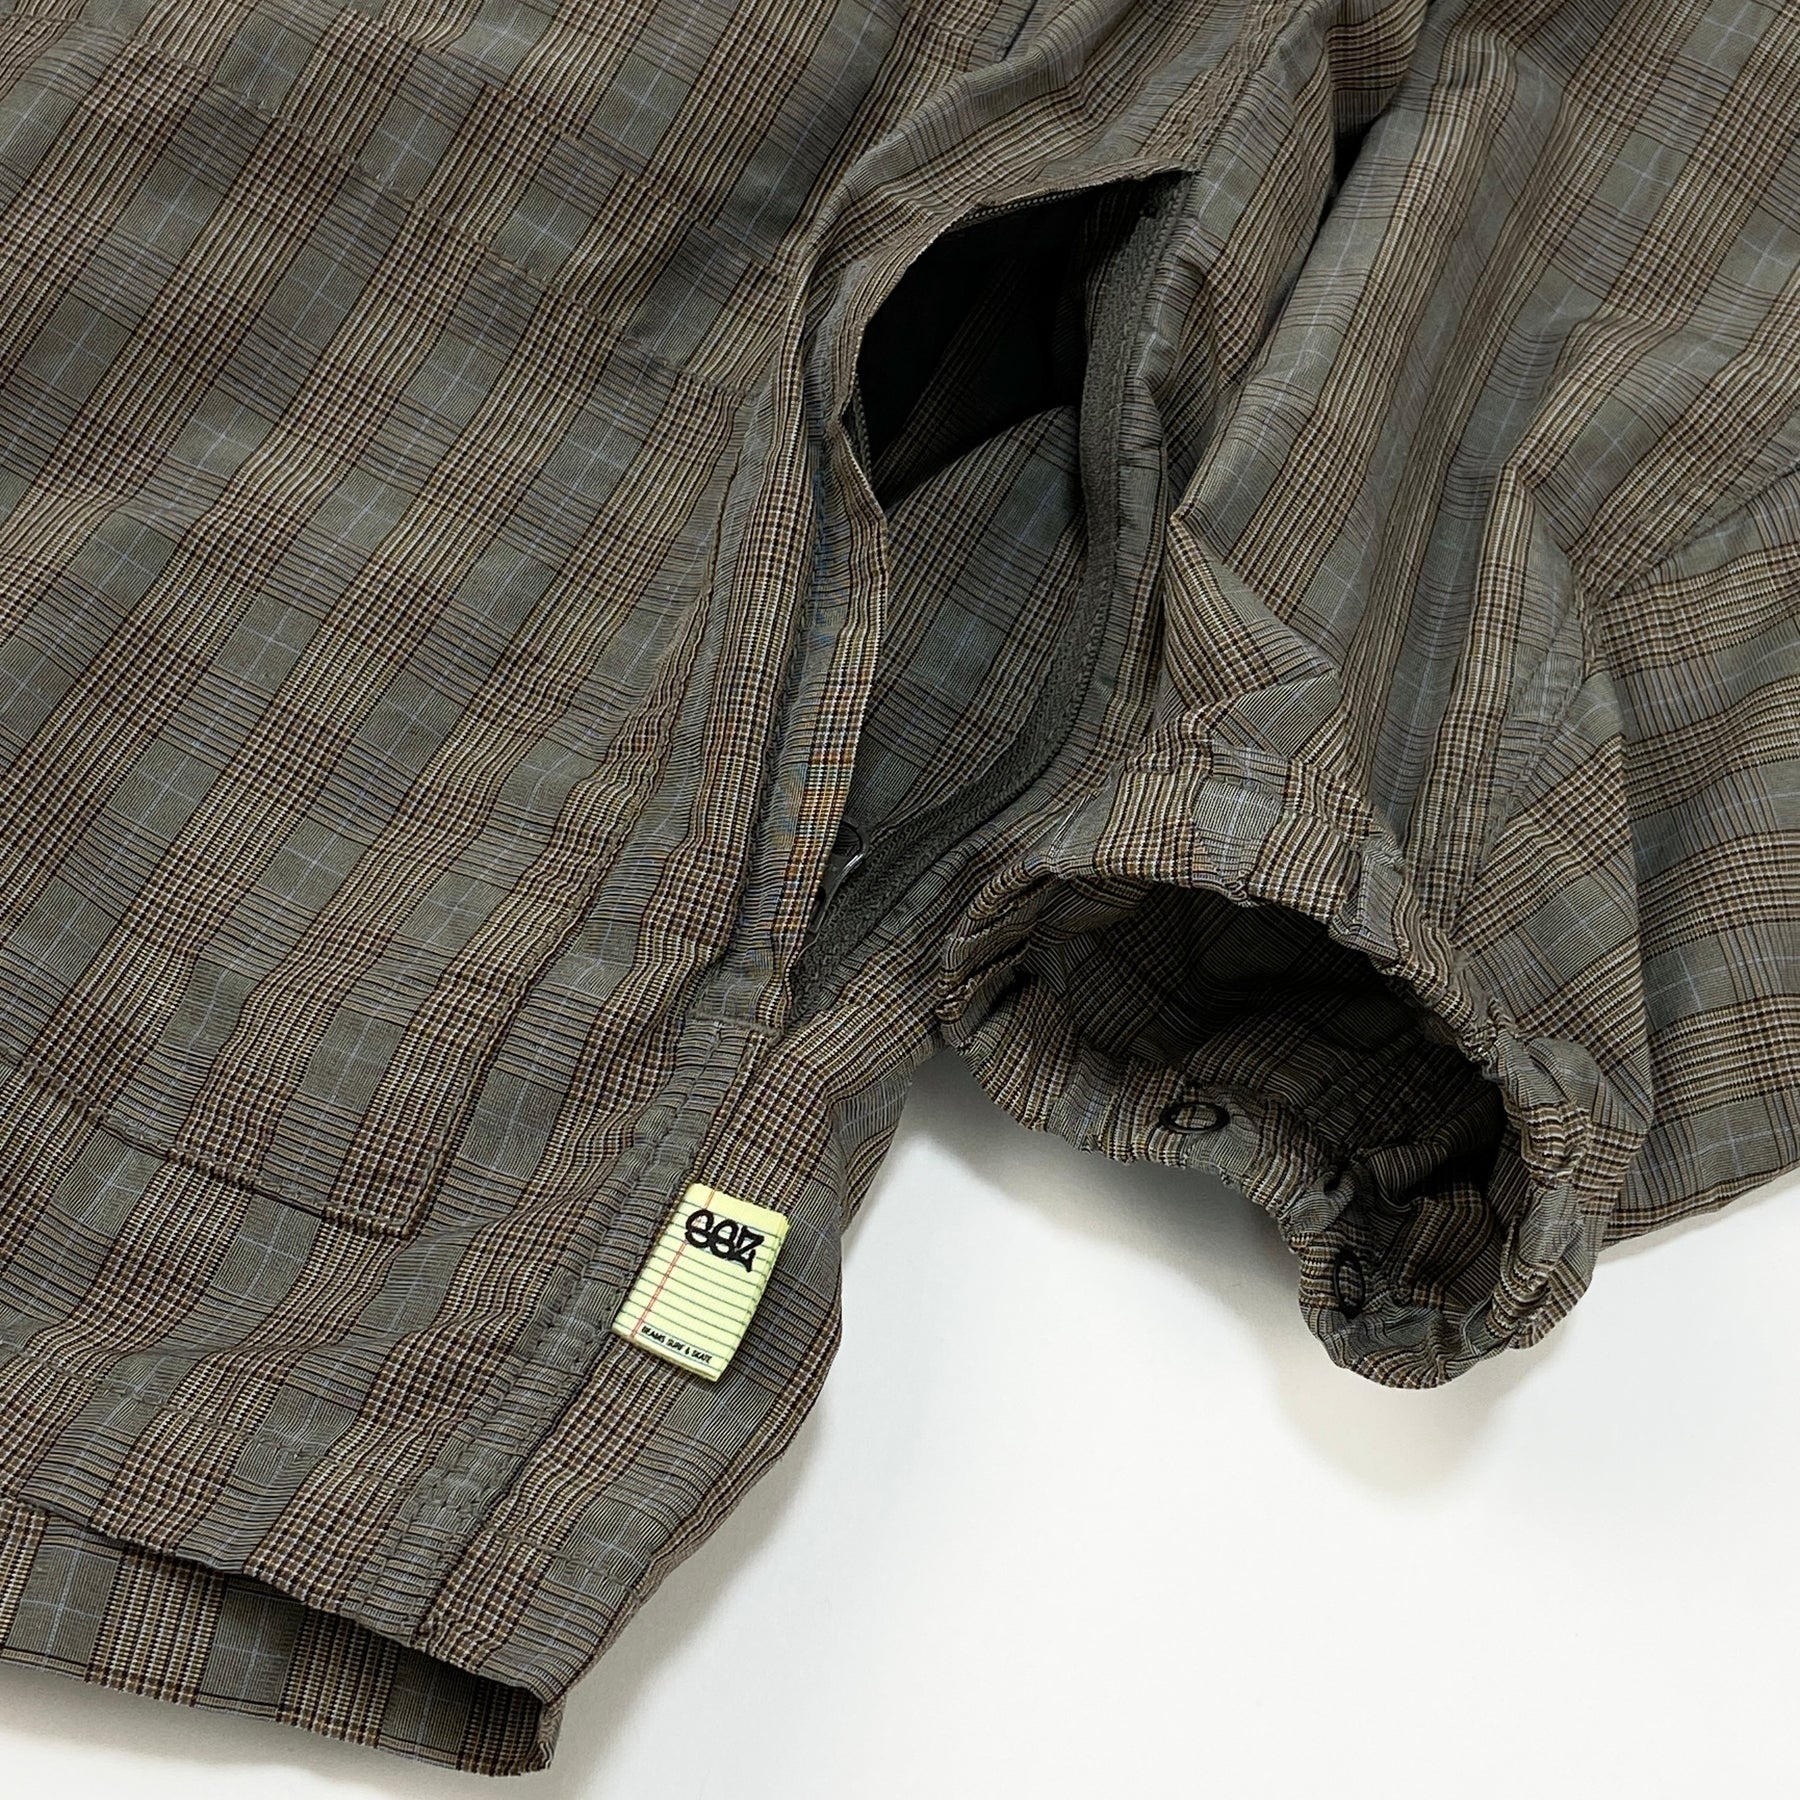 SSZ / エスエスズィー 2021SS ENERGY JACKET - BROWN CHECK 11-18-5954